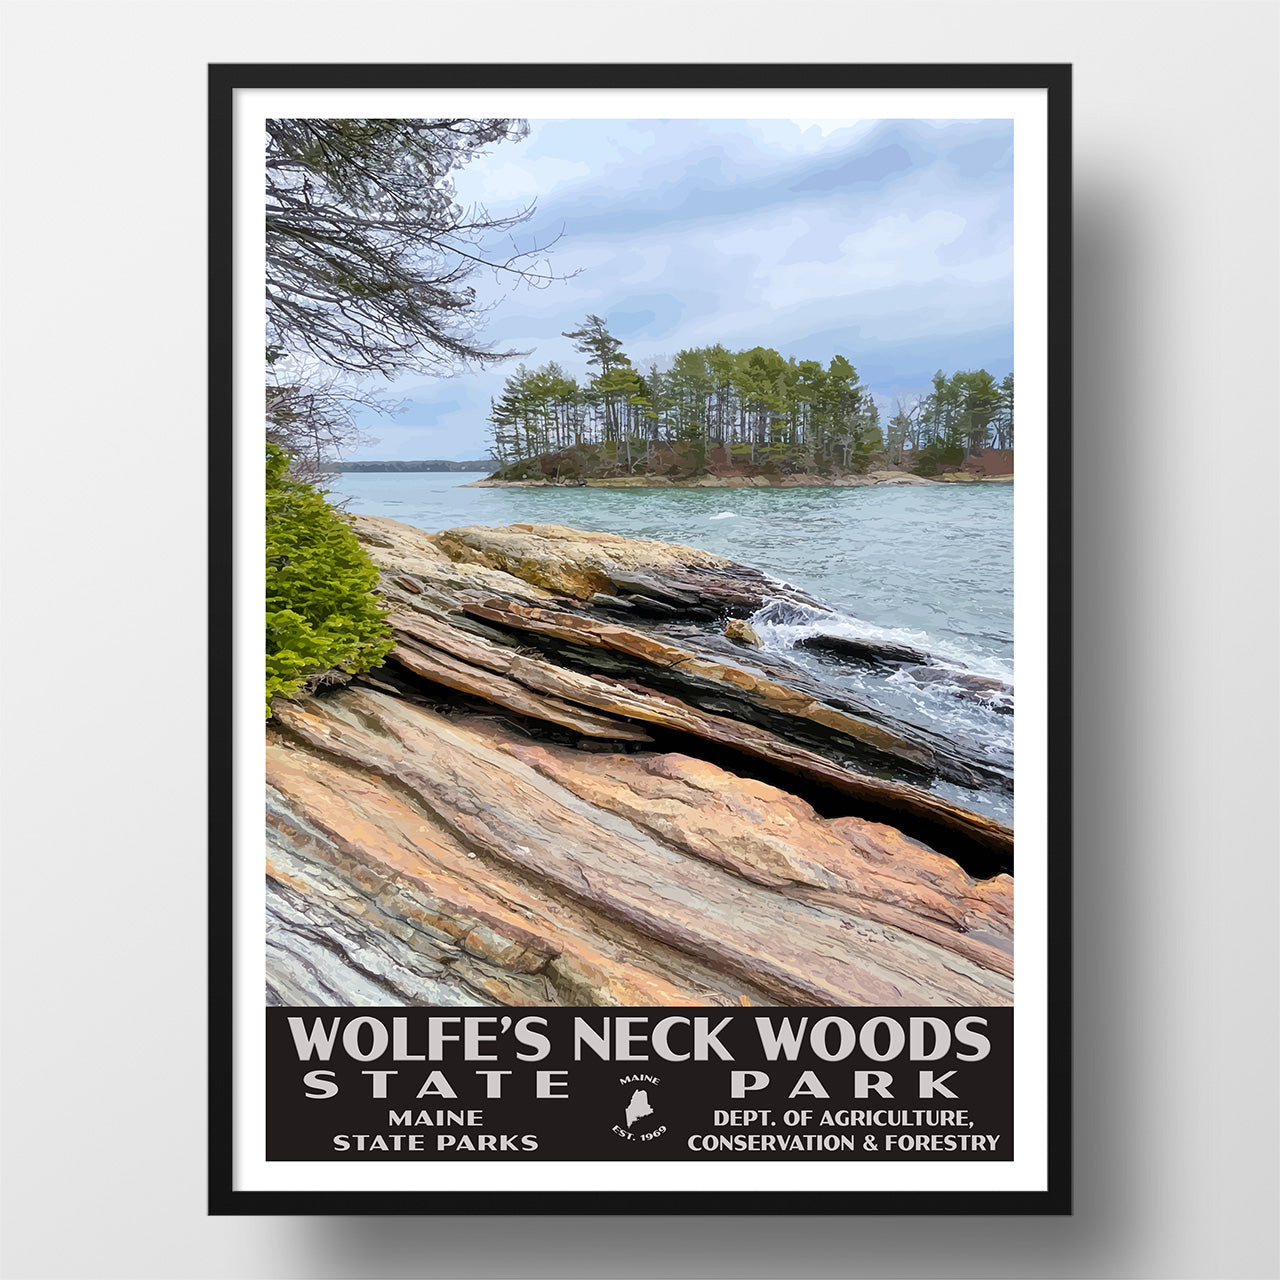 Wolfe's Neck Woods State Park Poster - WPA (Casco Bay)